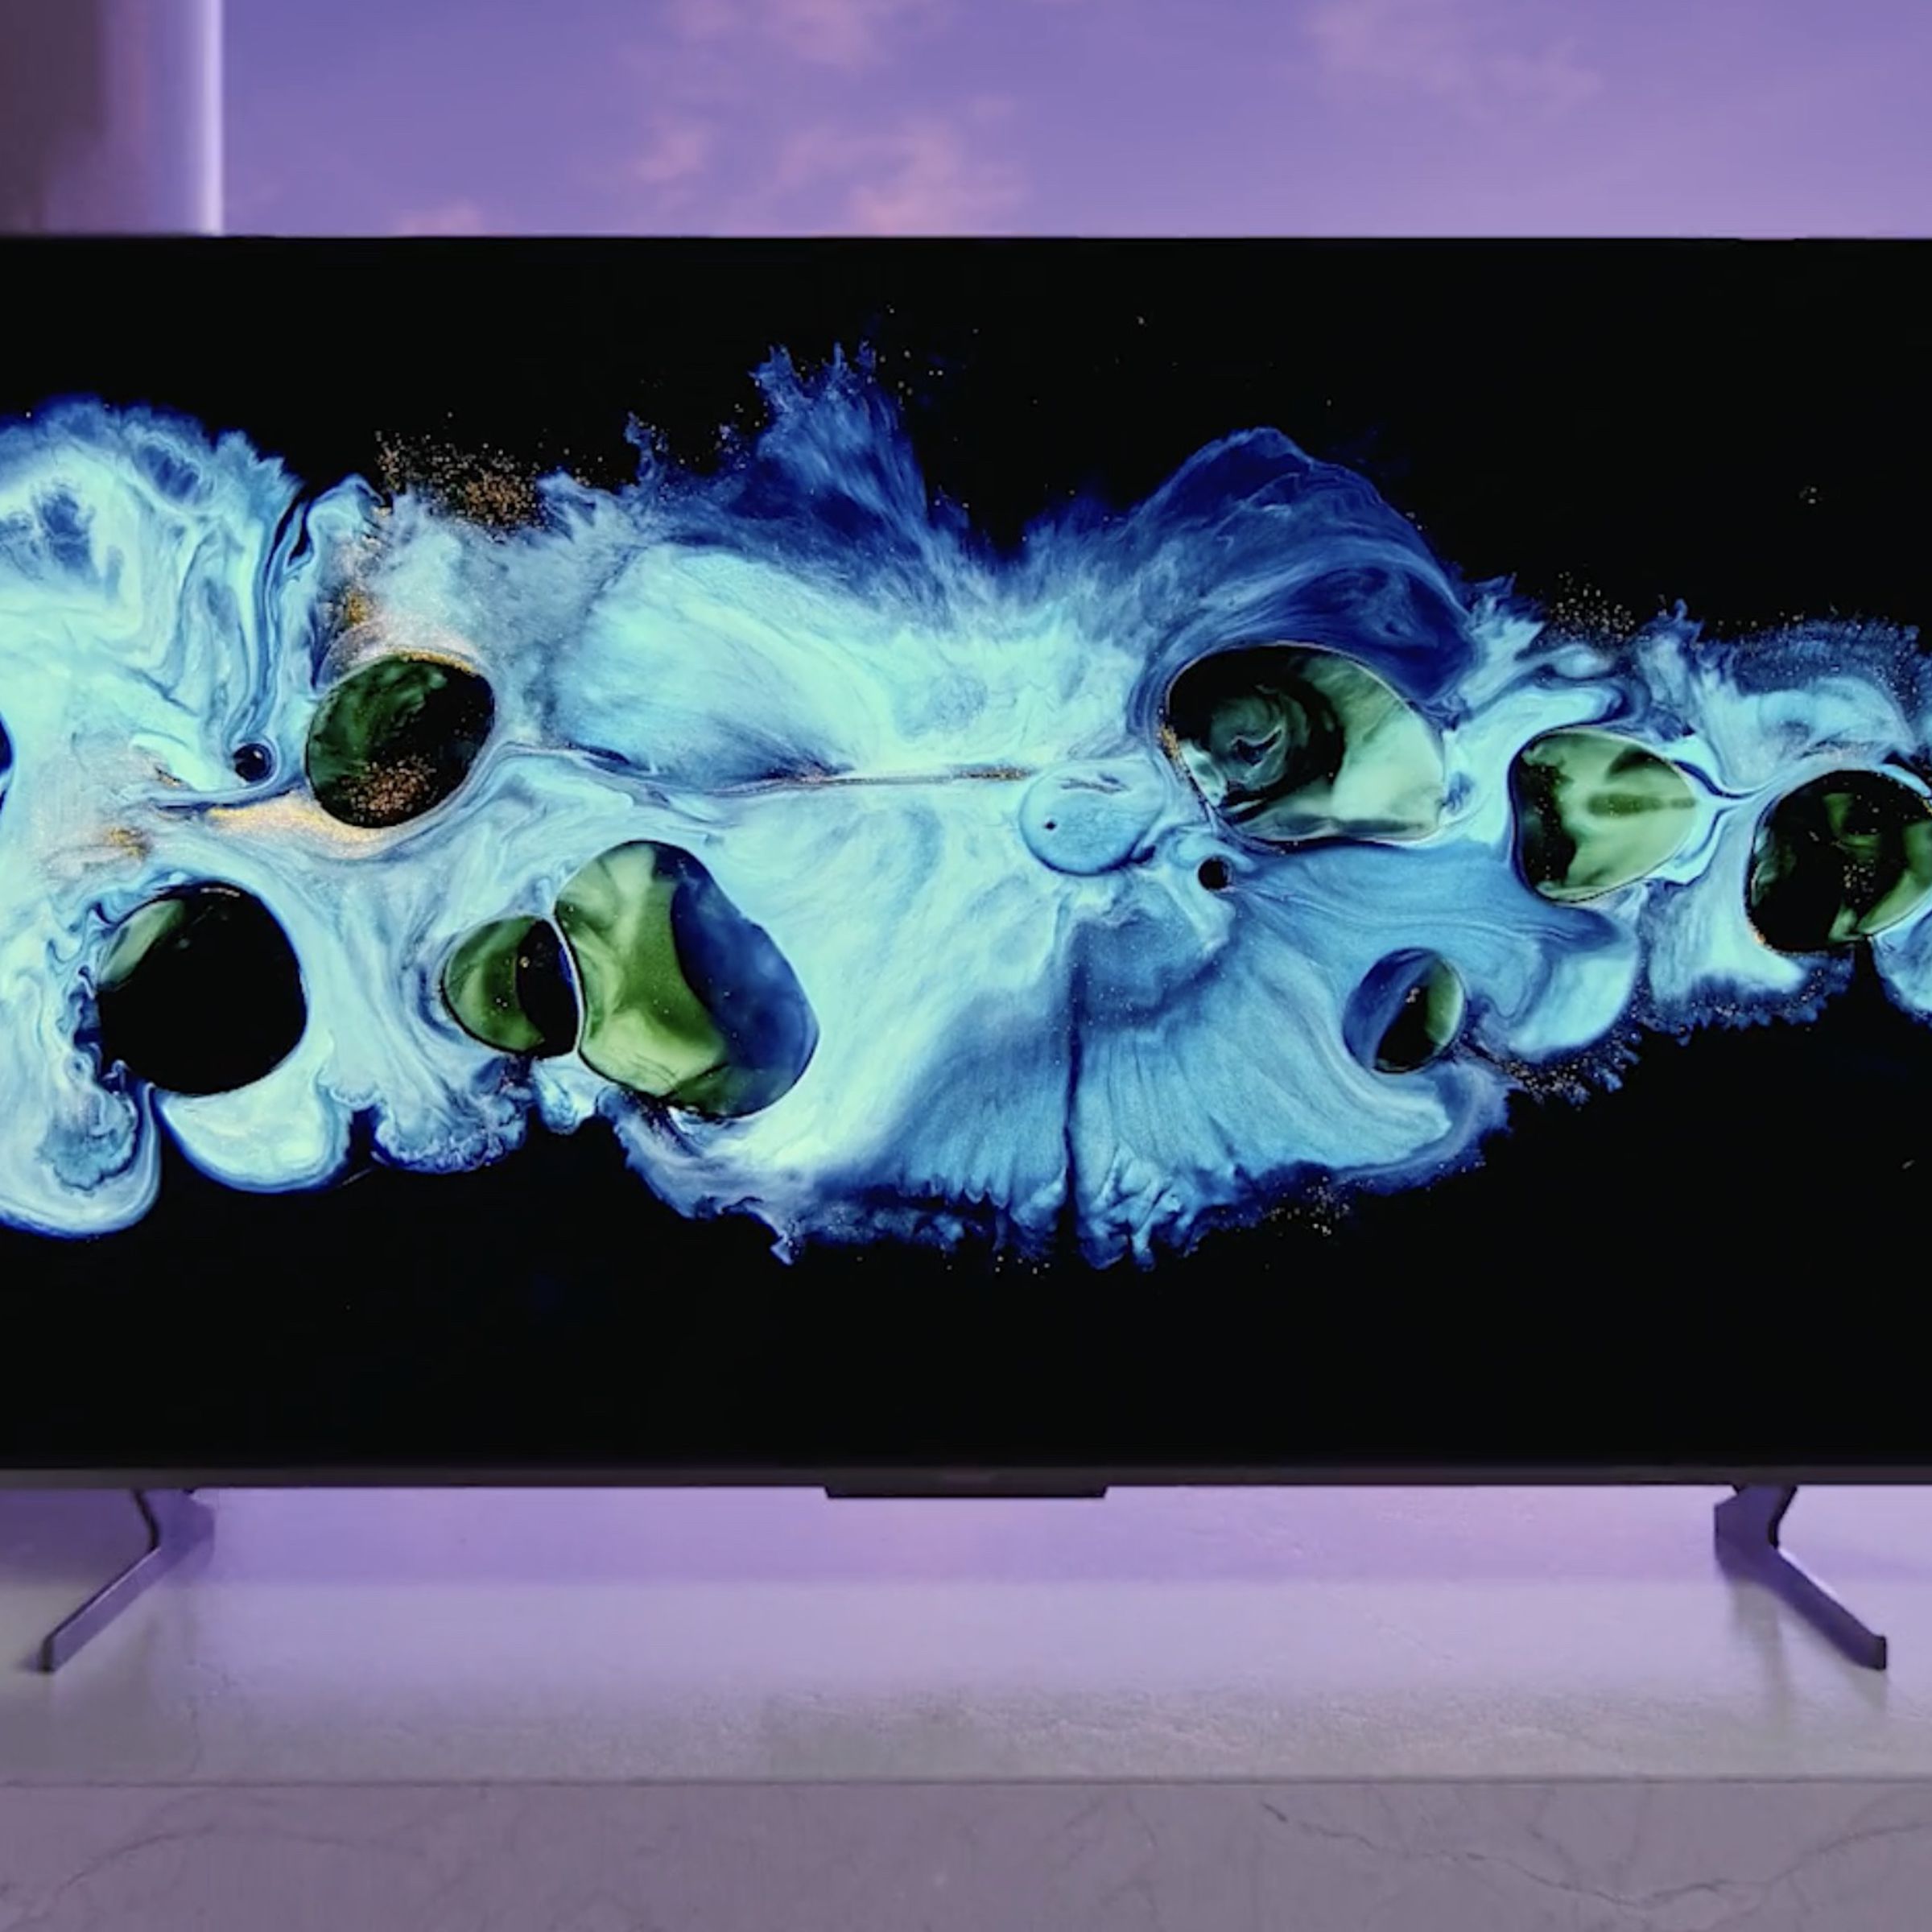 A press image / render of Hisense’s U8H with a colorful graphic displayed on its screen.